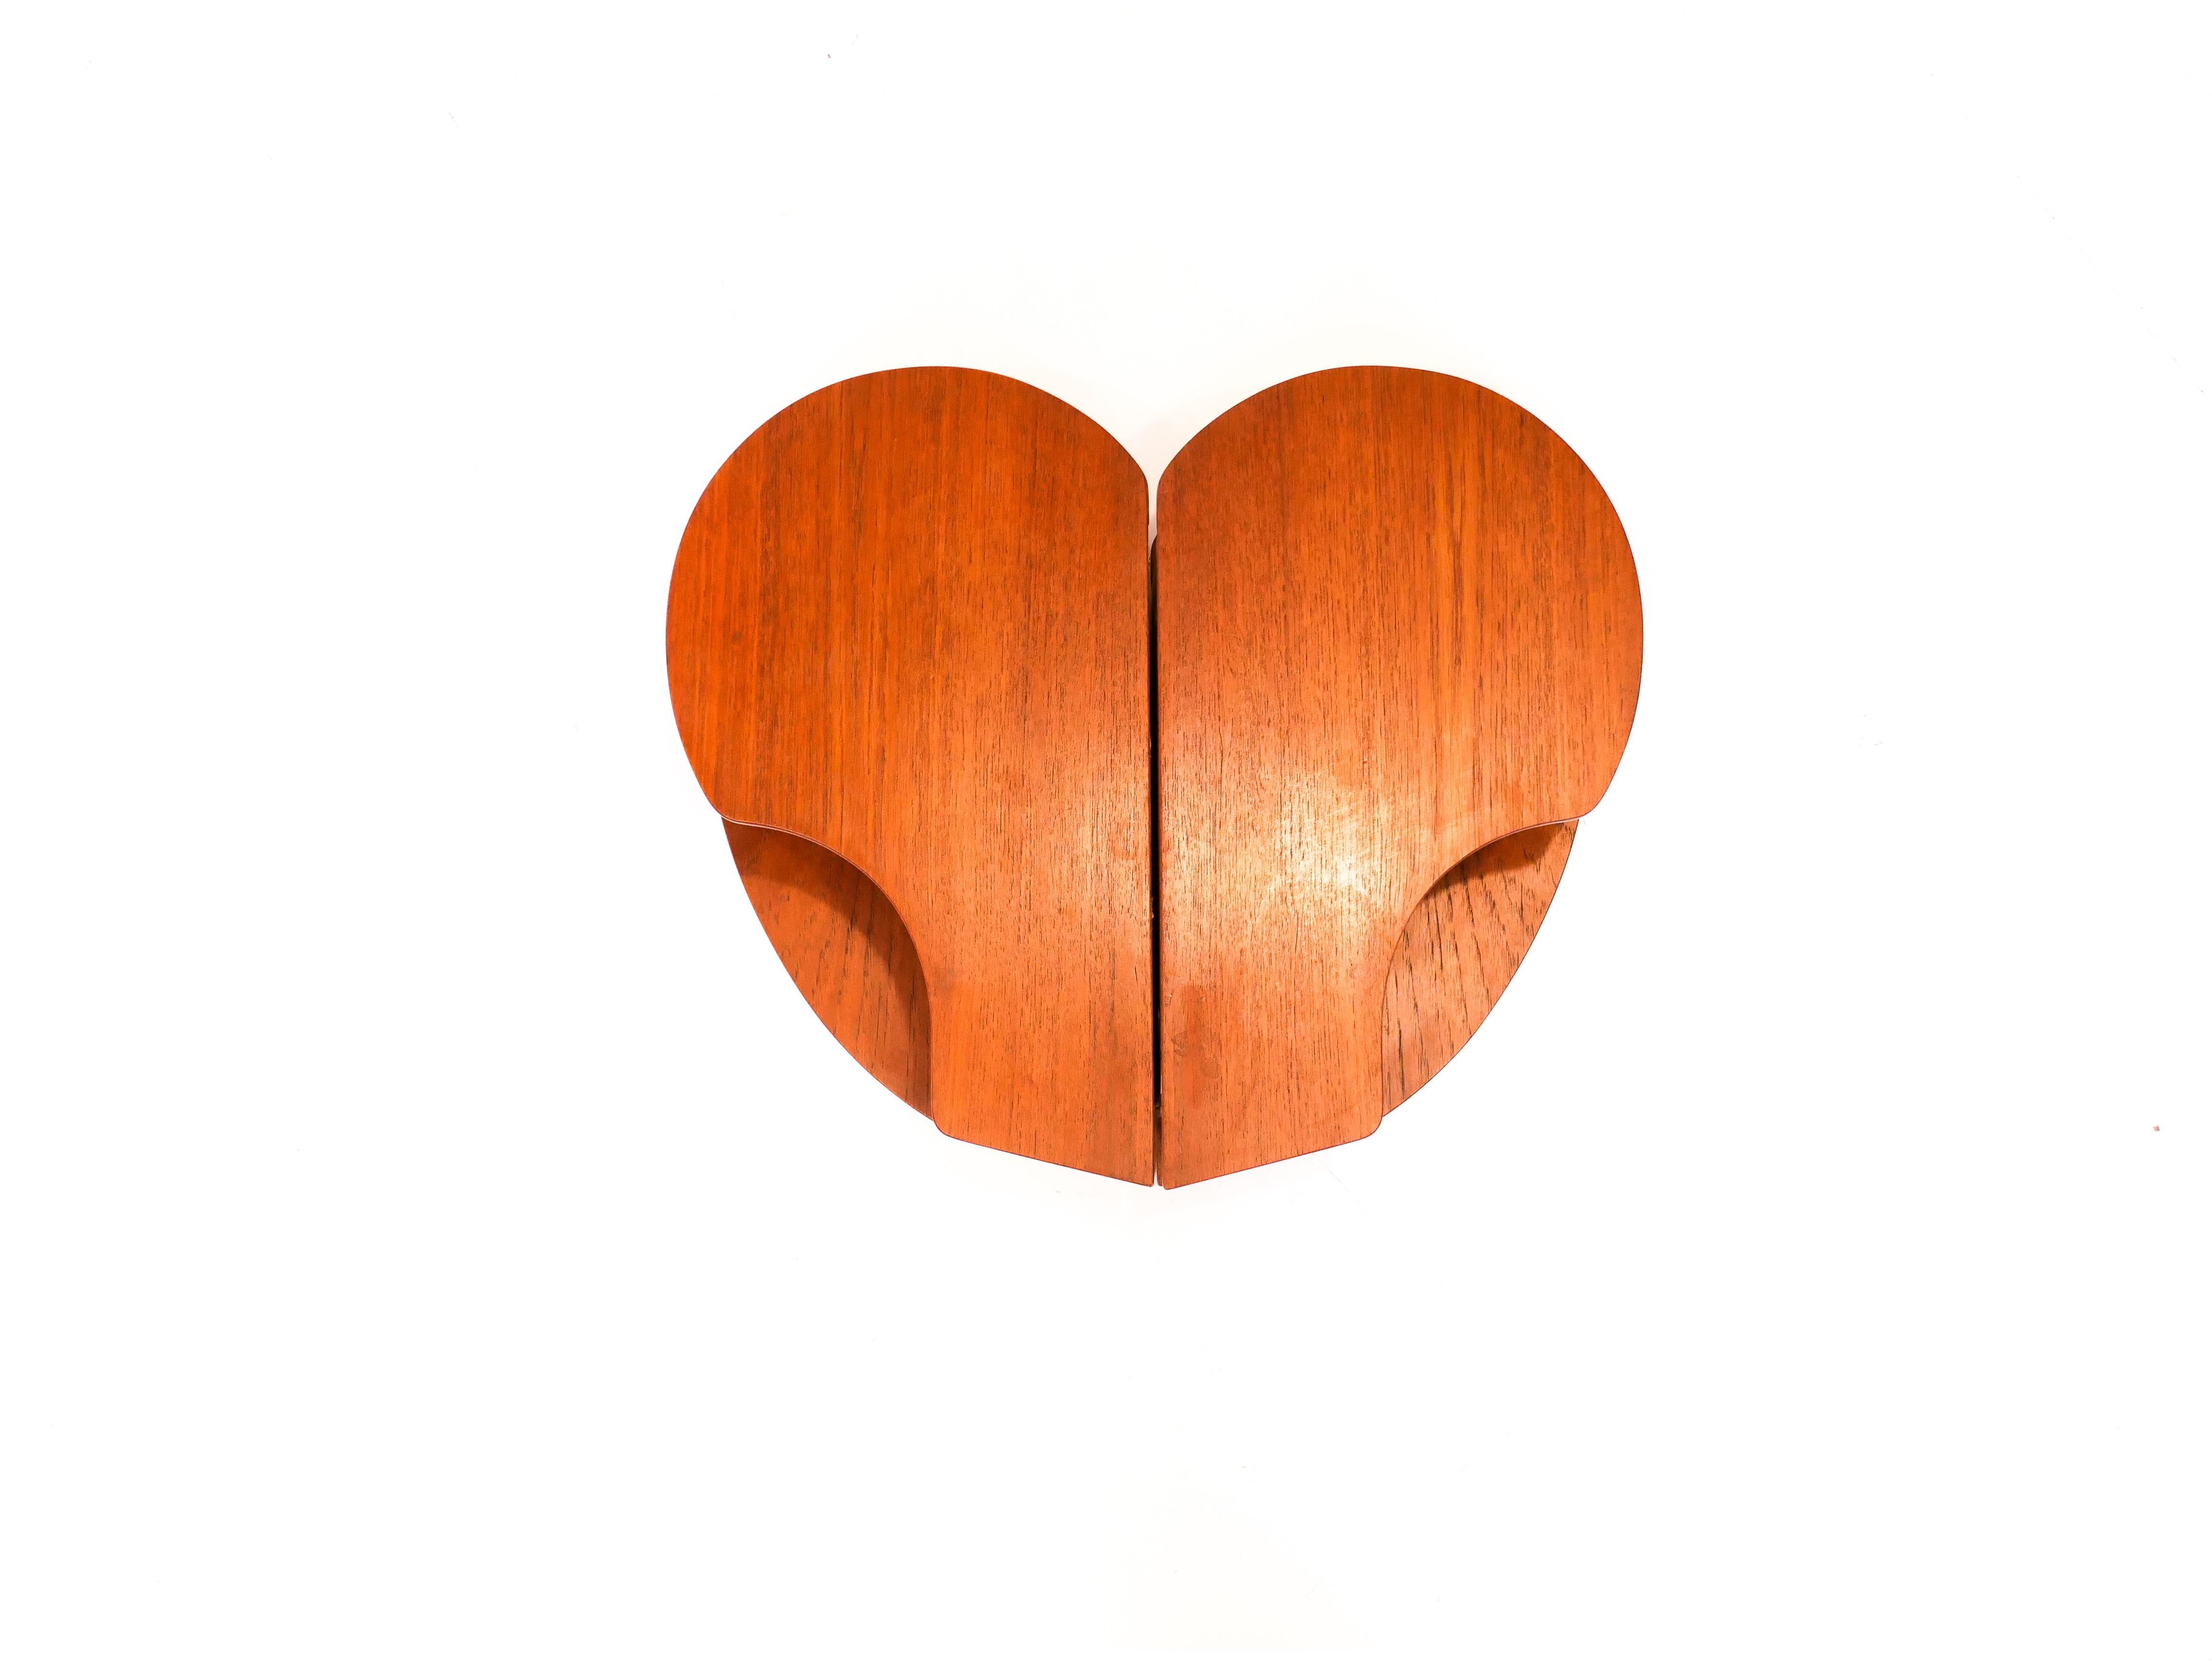 Mid-20th Century Kidney Shaped Wall Mounted Bedside Tables, Denmark 1950s Teak For Sale